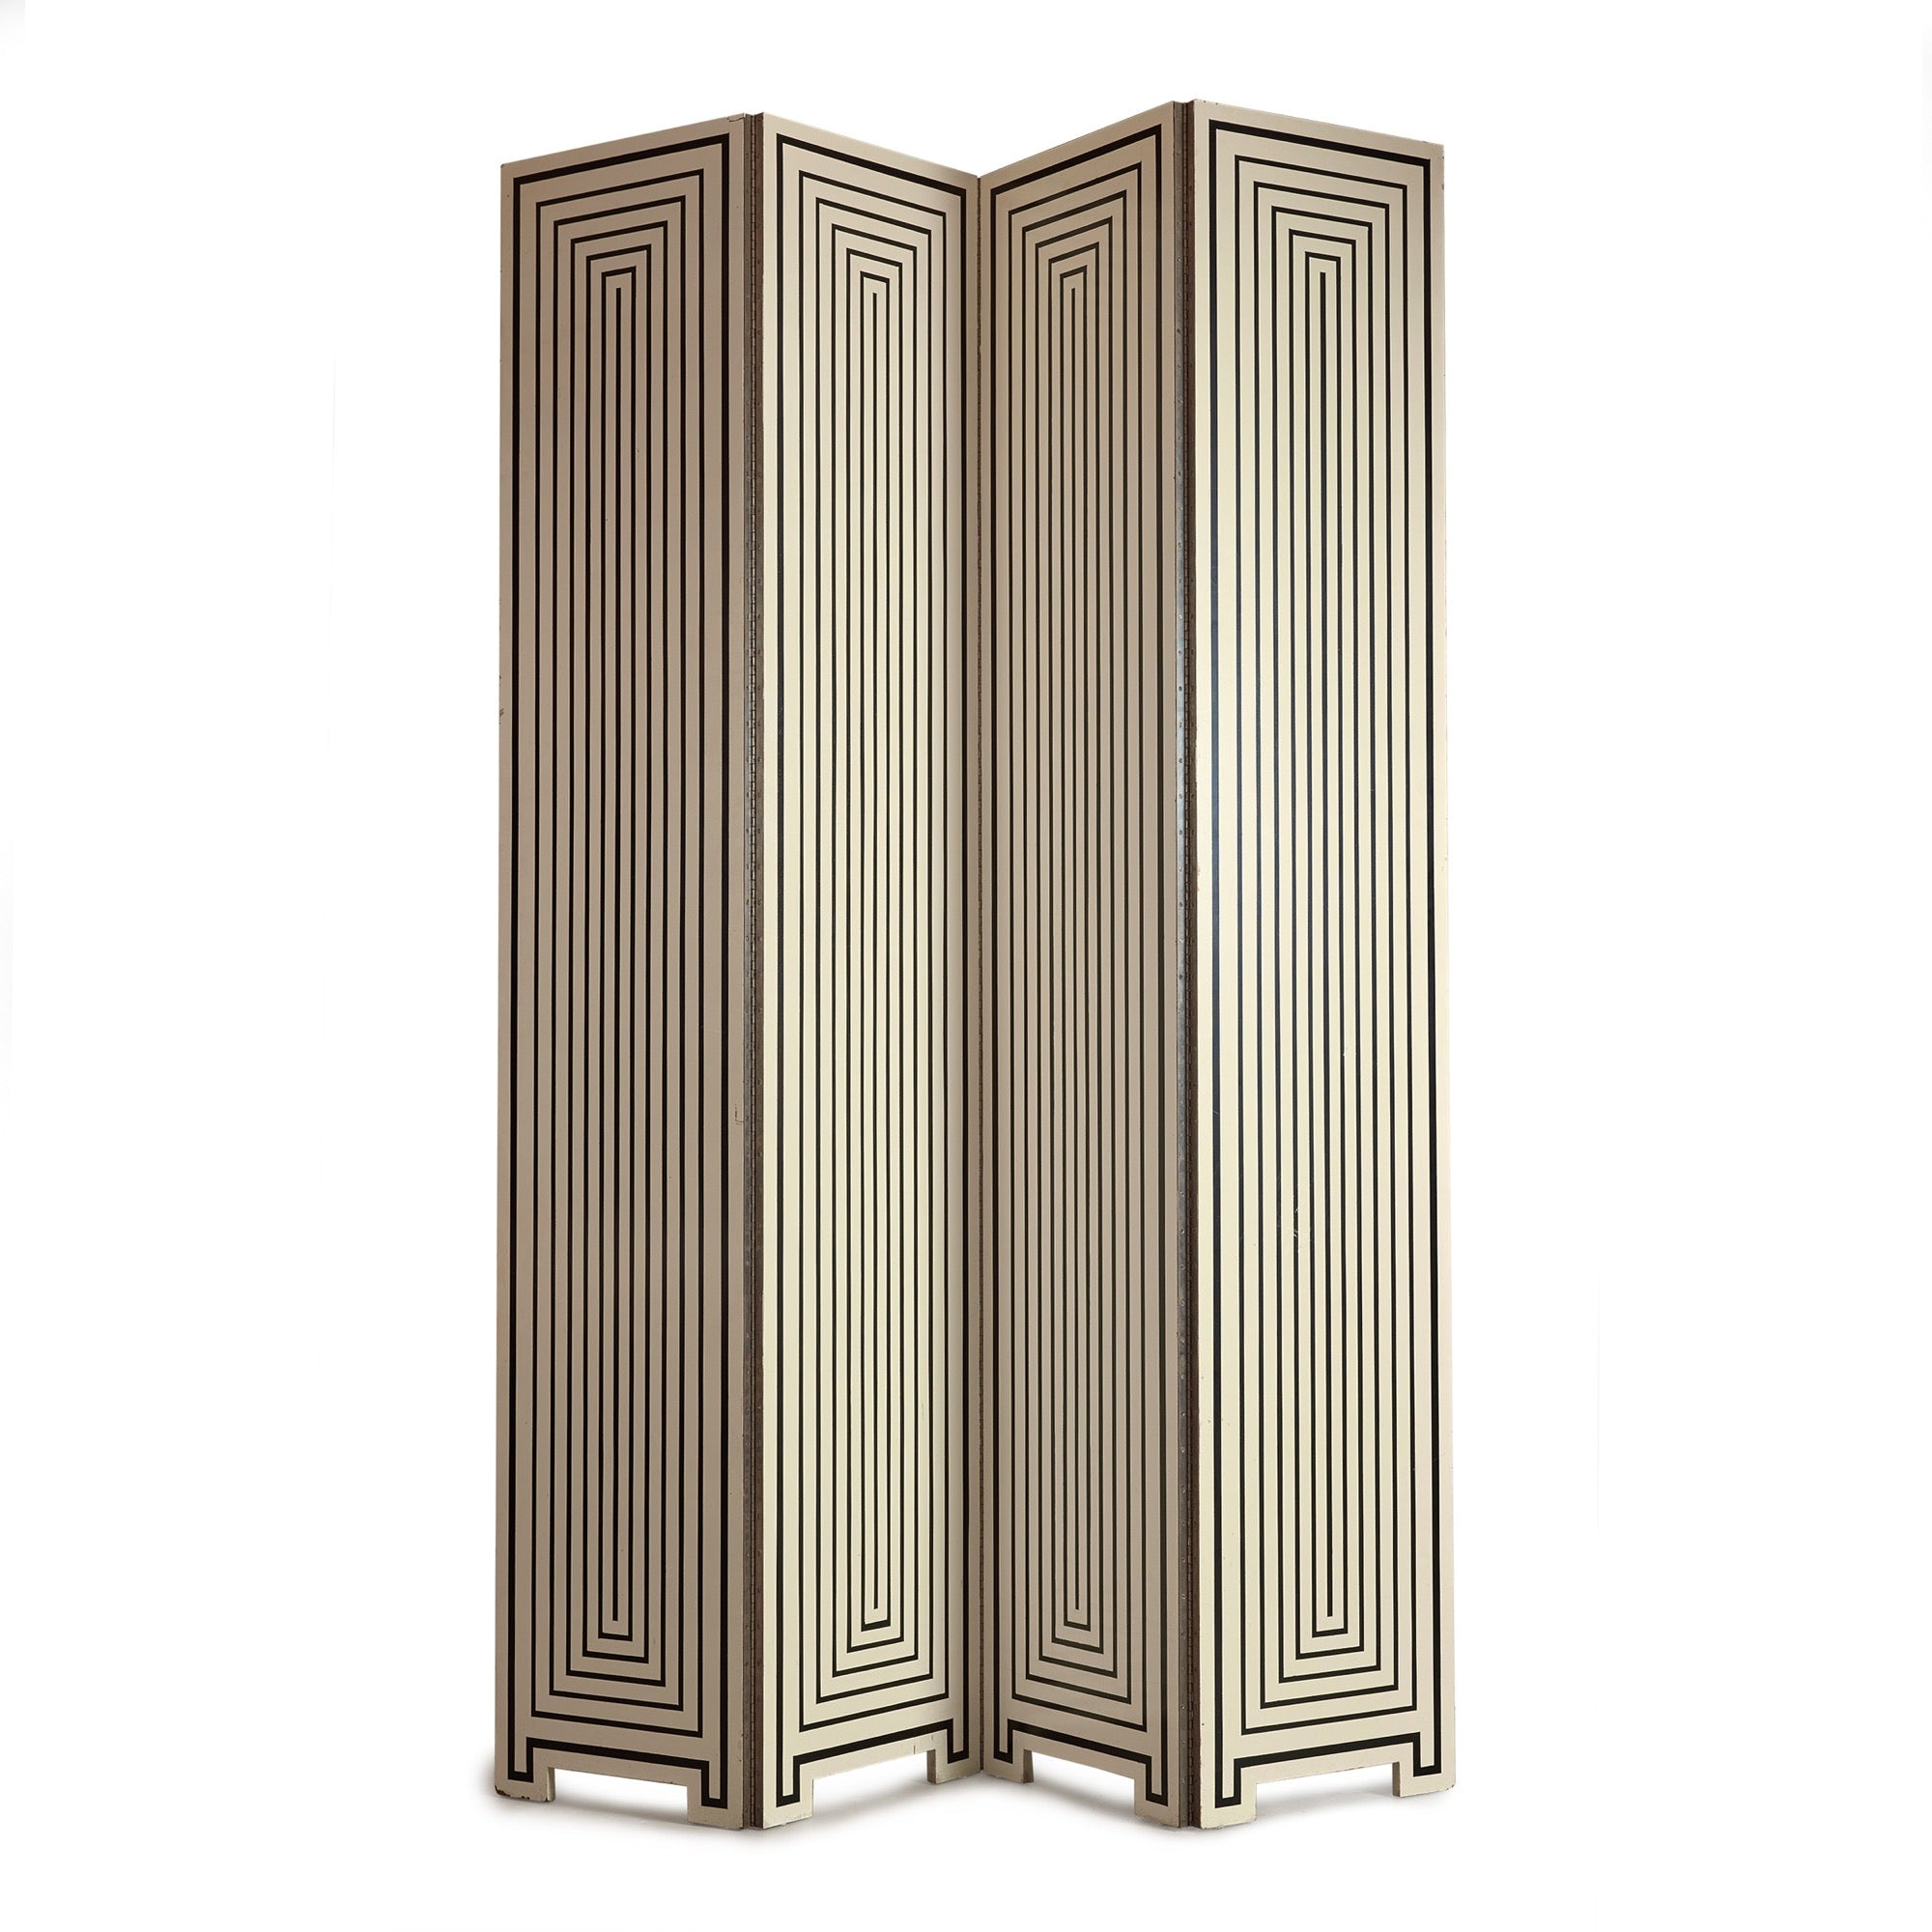 Art Deco Revival Screen from USA